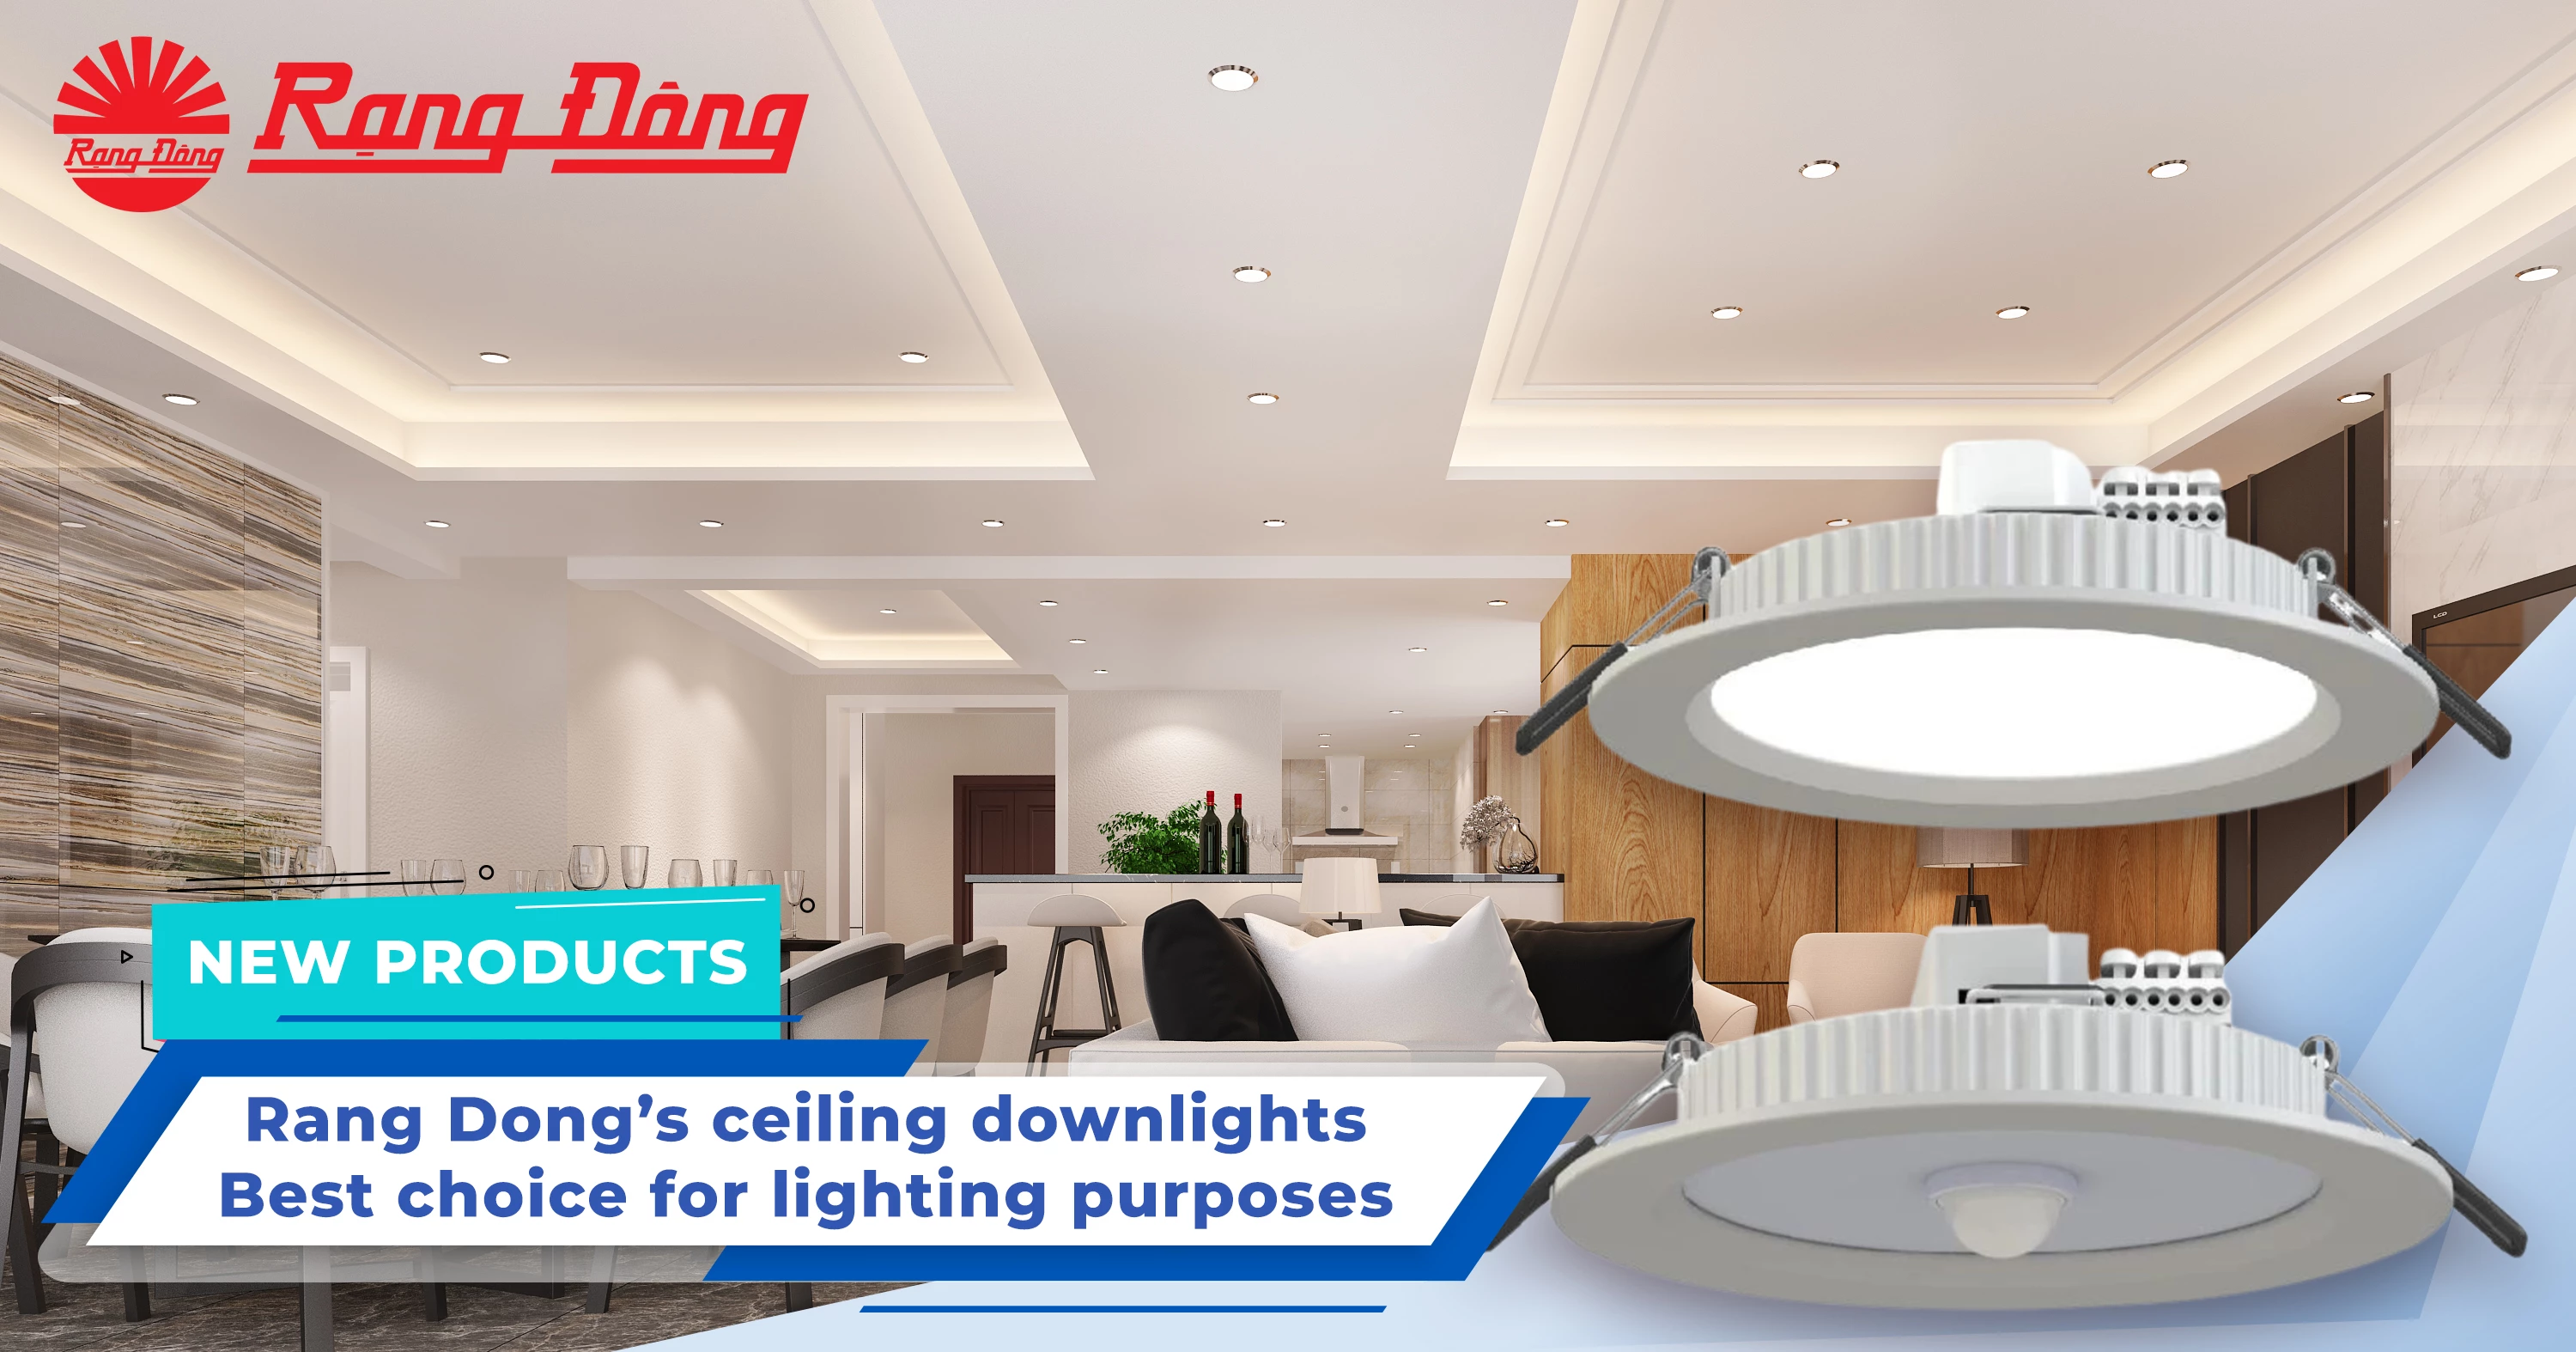 Rang Dong’s ceiling downlights - Best choice for lighting purposes